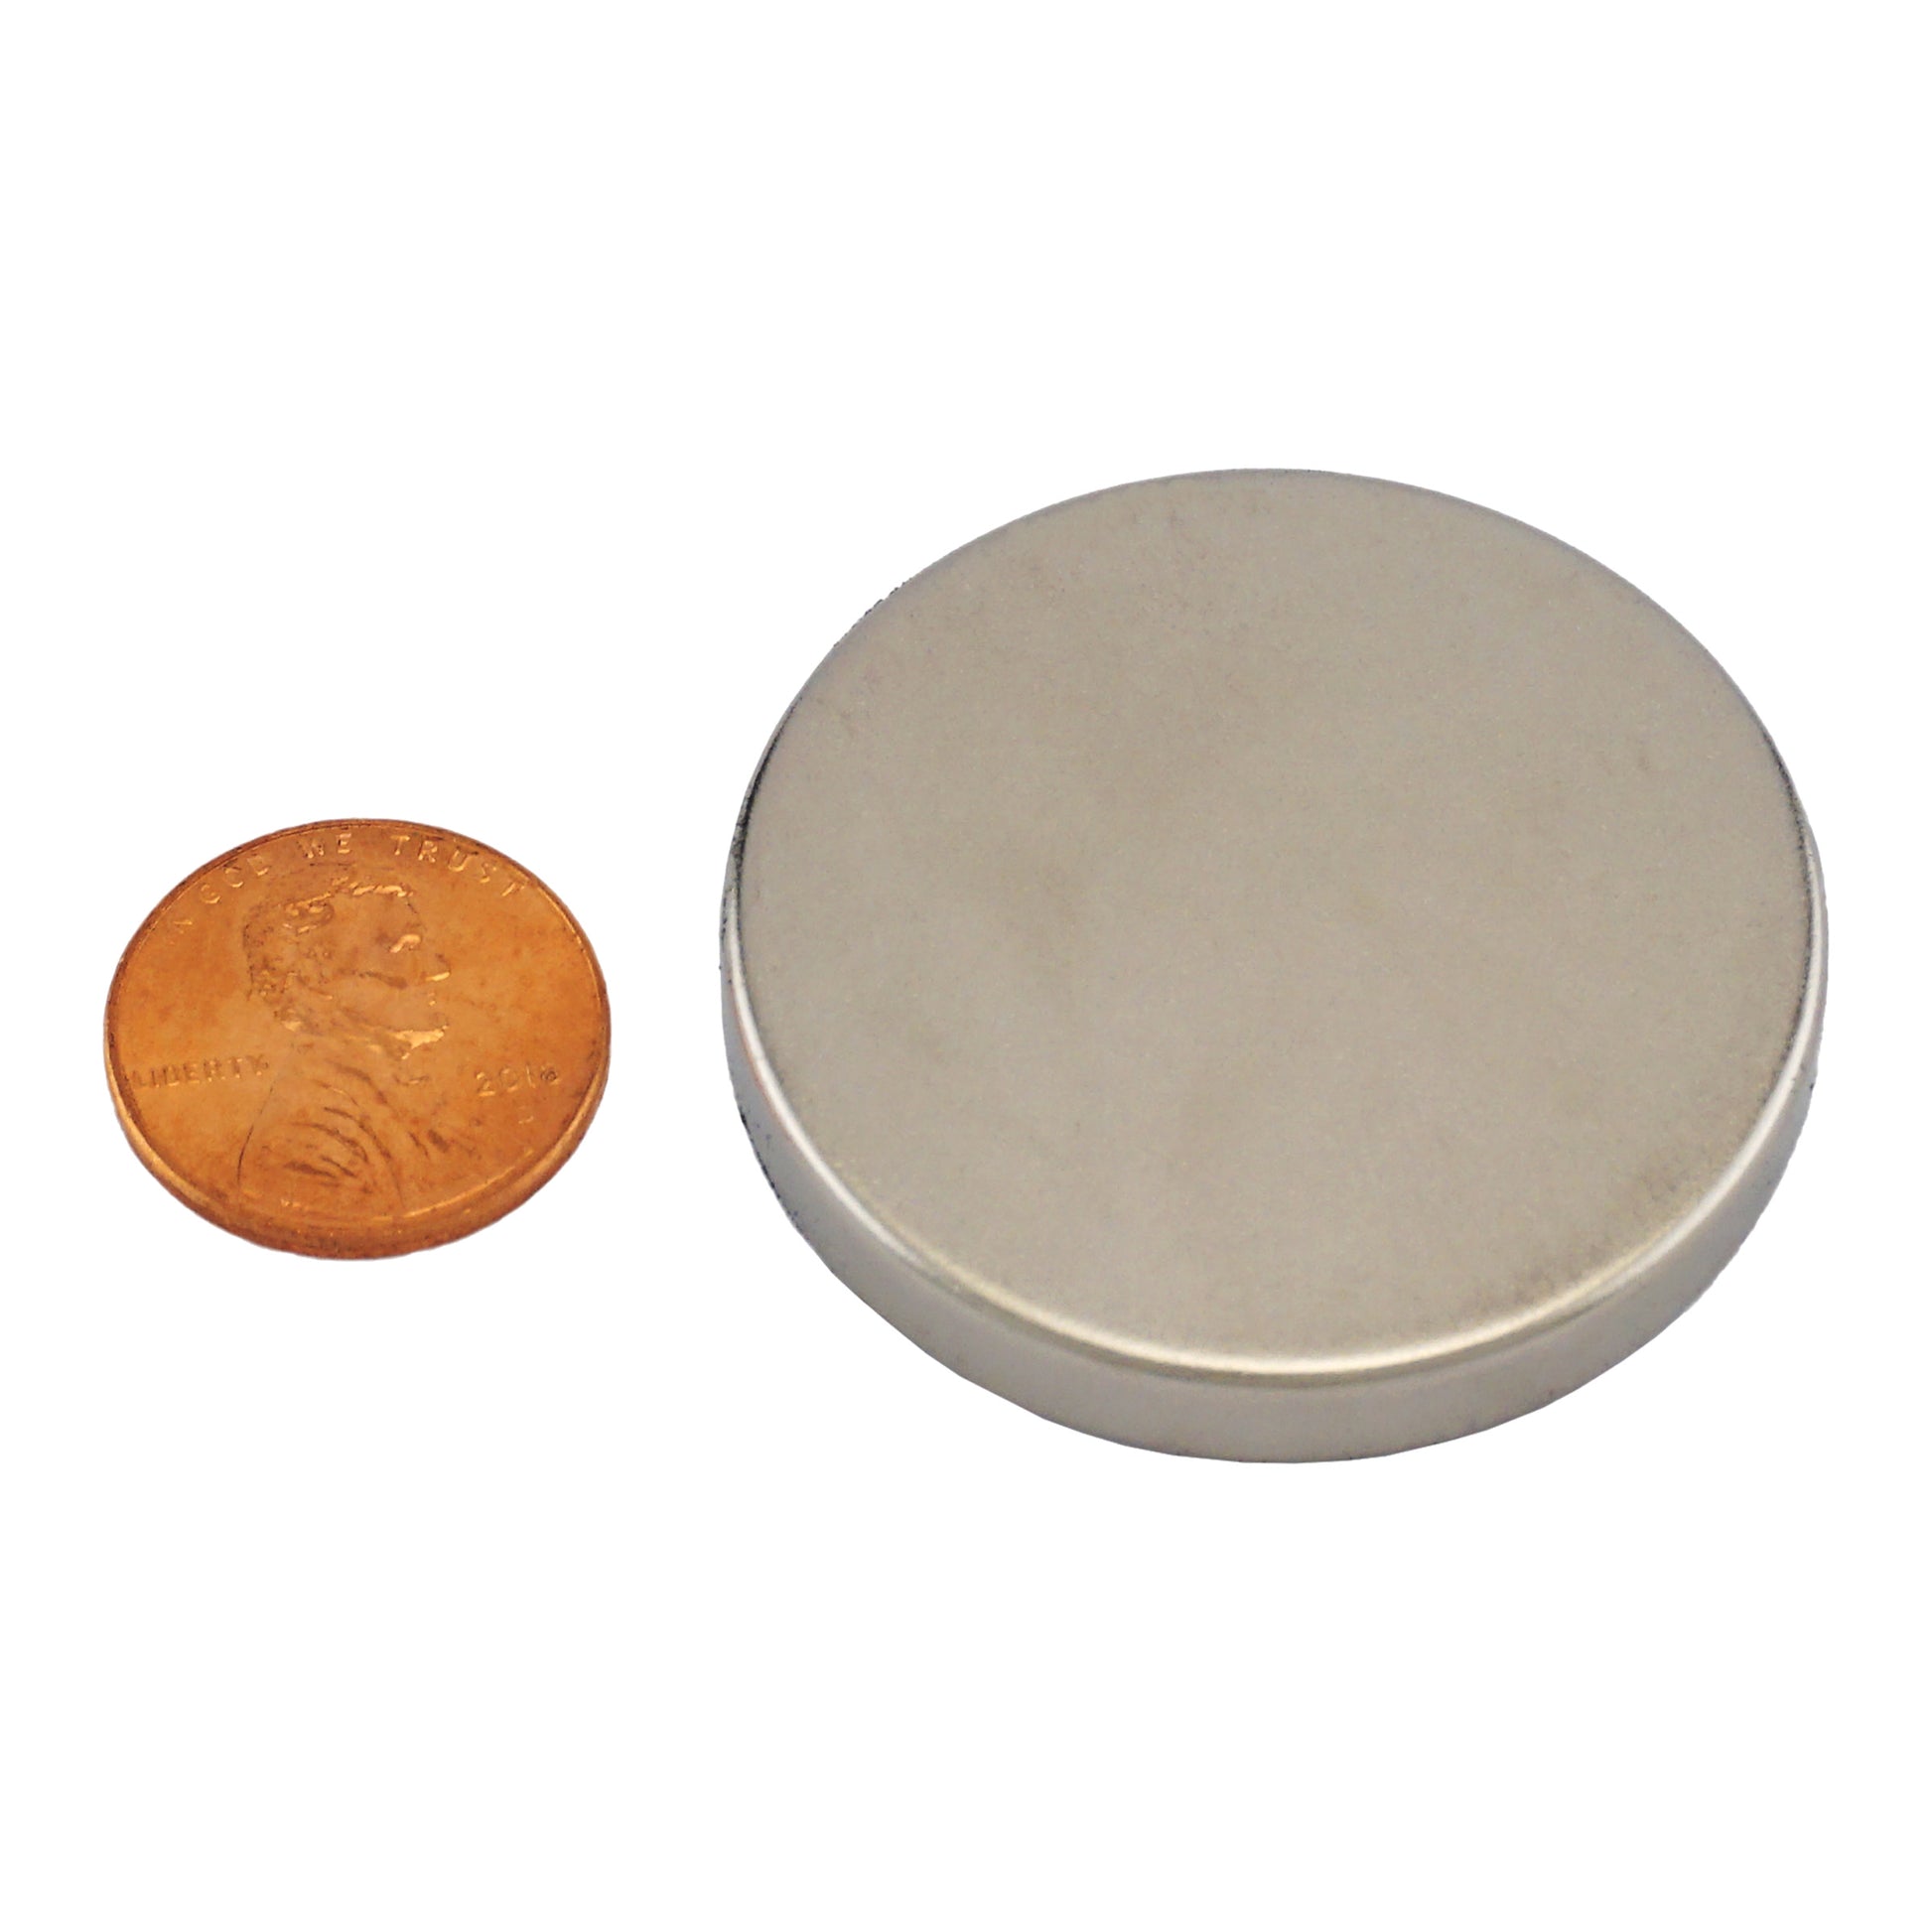 Load image into Gallery viewer, ND016202N Neodymium Disc Magnet - Compared to Penny for Size Reference